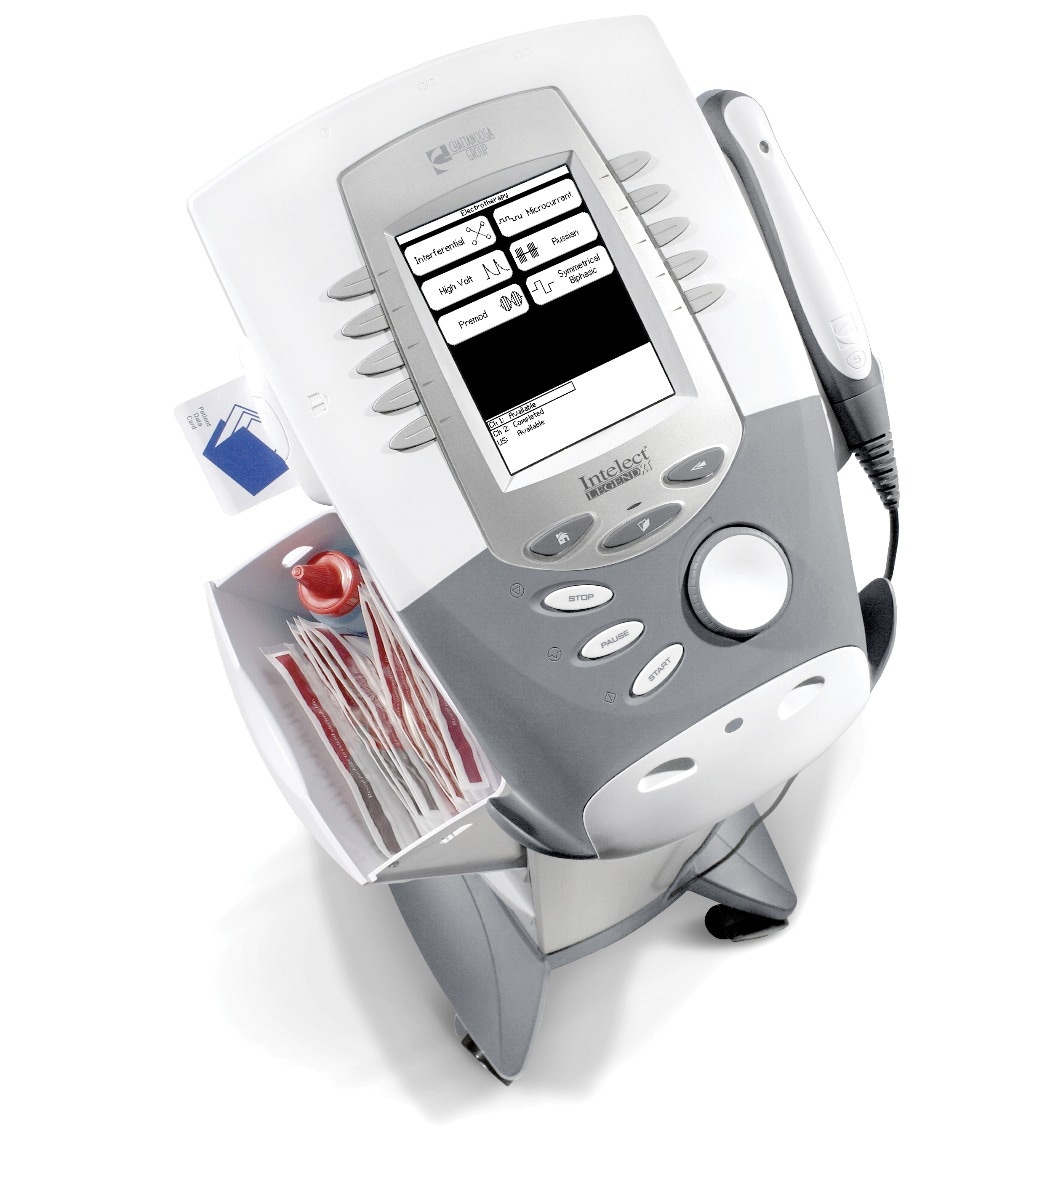 https://www.performancehealth.com/media/catalog/product/e/l/electrotherapy.jpg